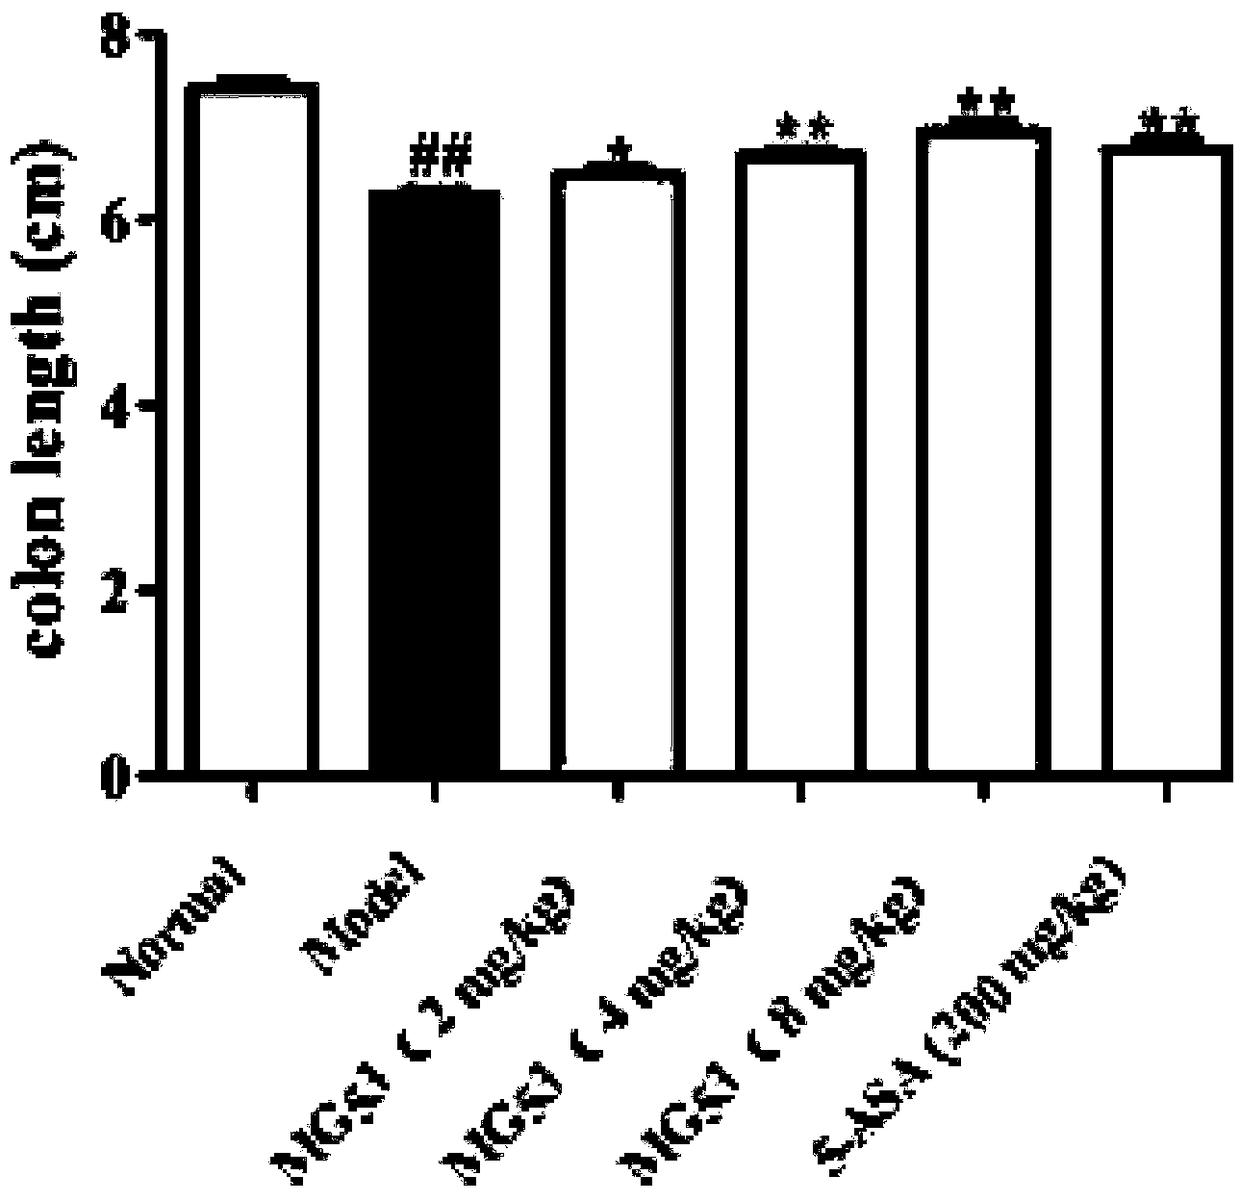 Application of MG53/MG53 mutant-containing composition in preparation of inflammatory bowel disease drug